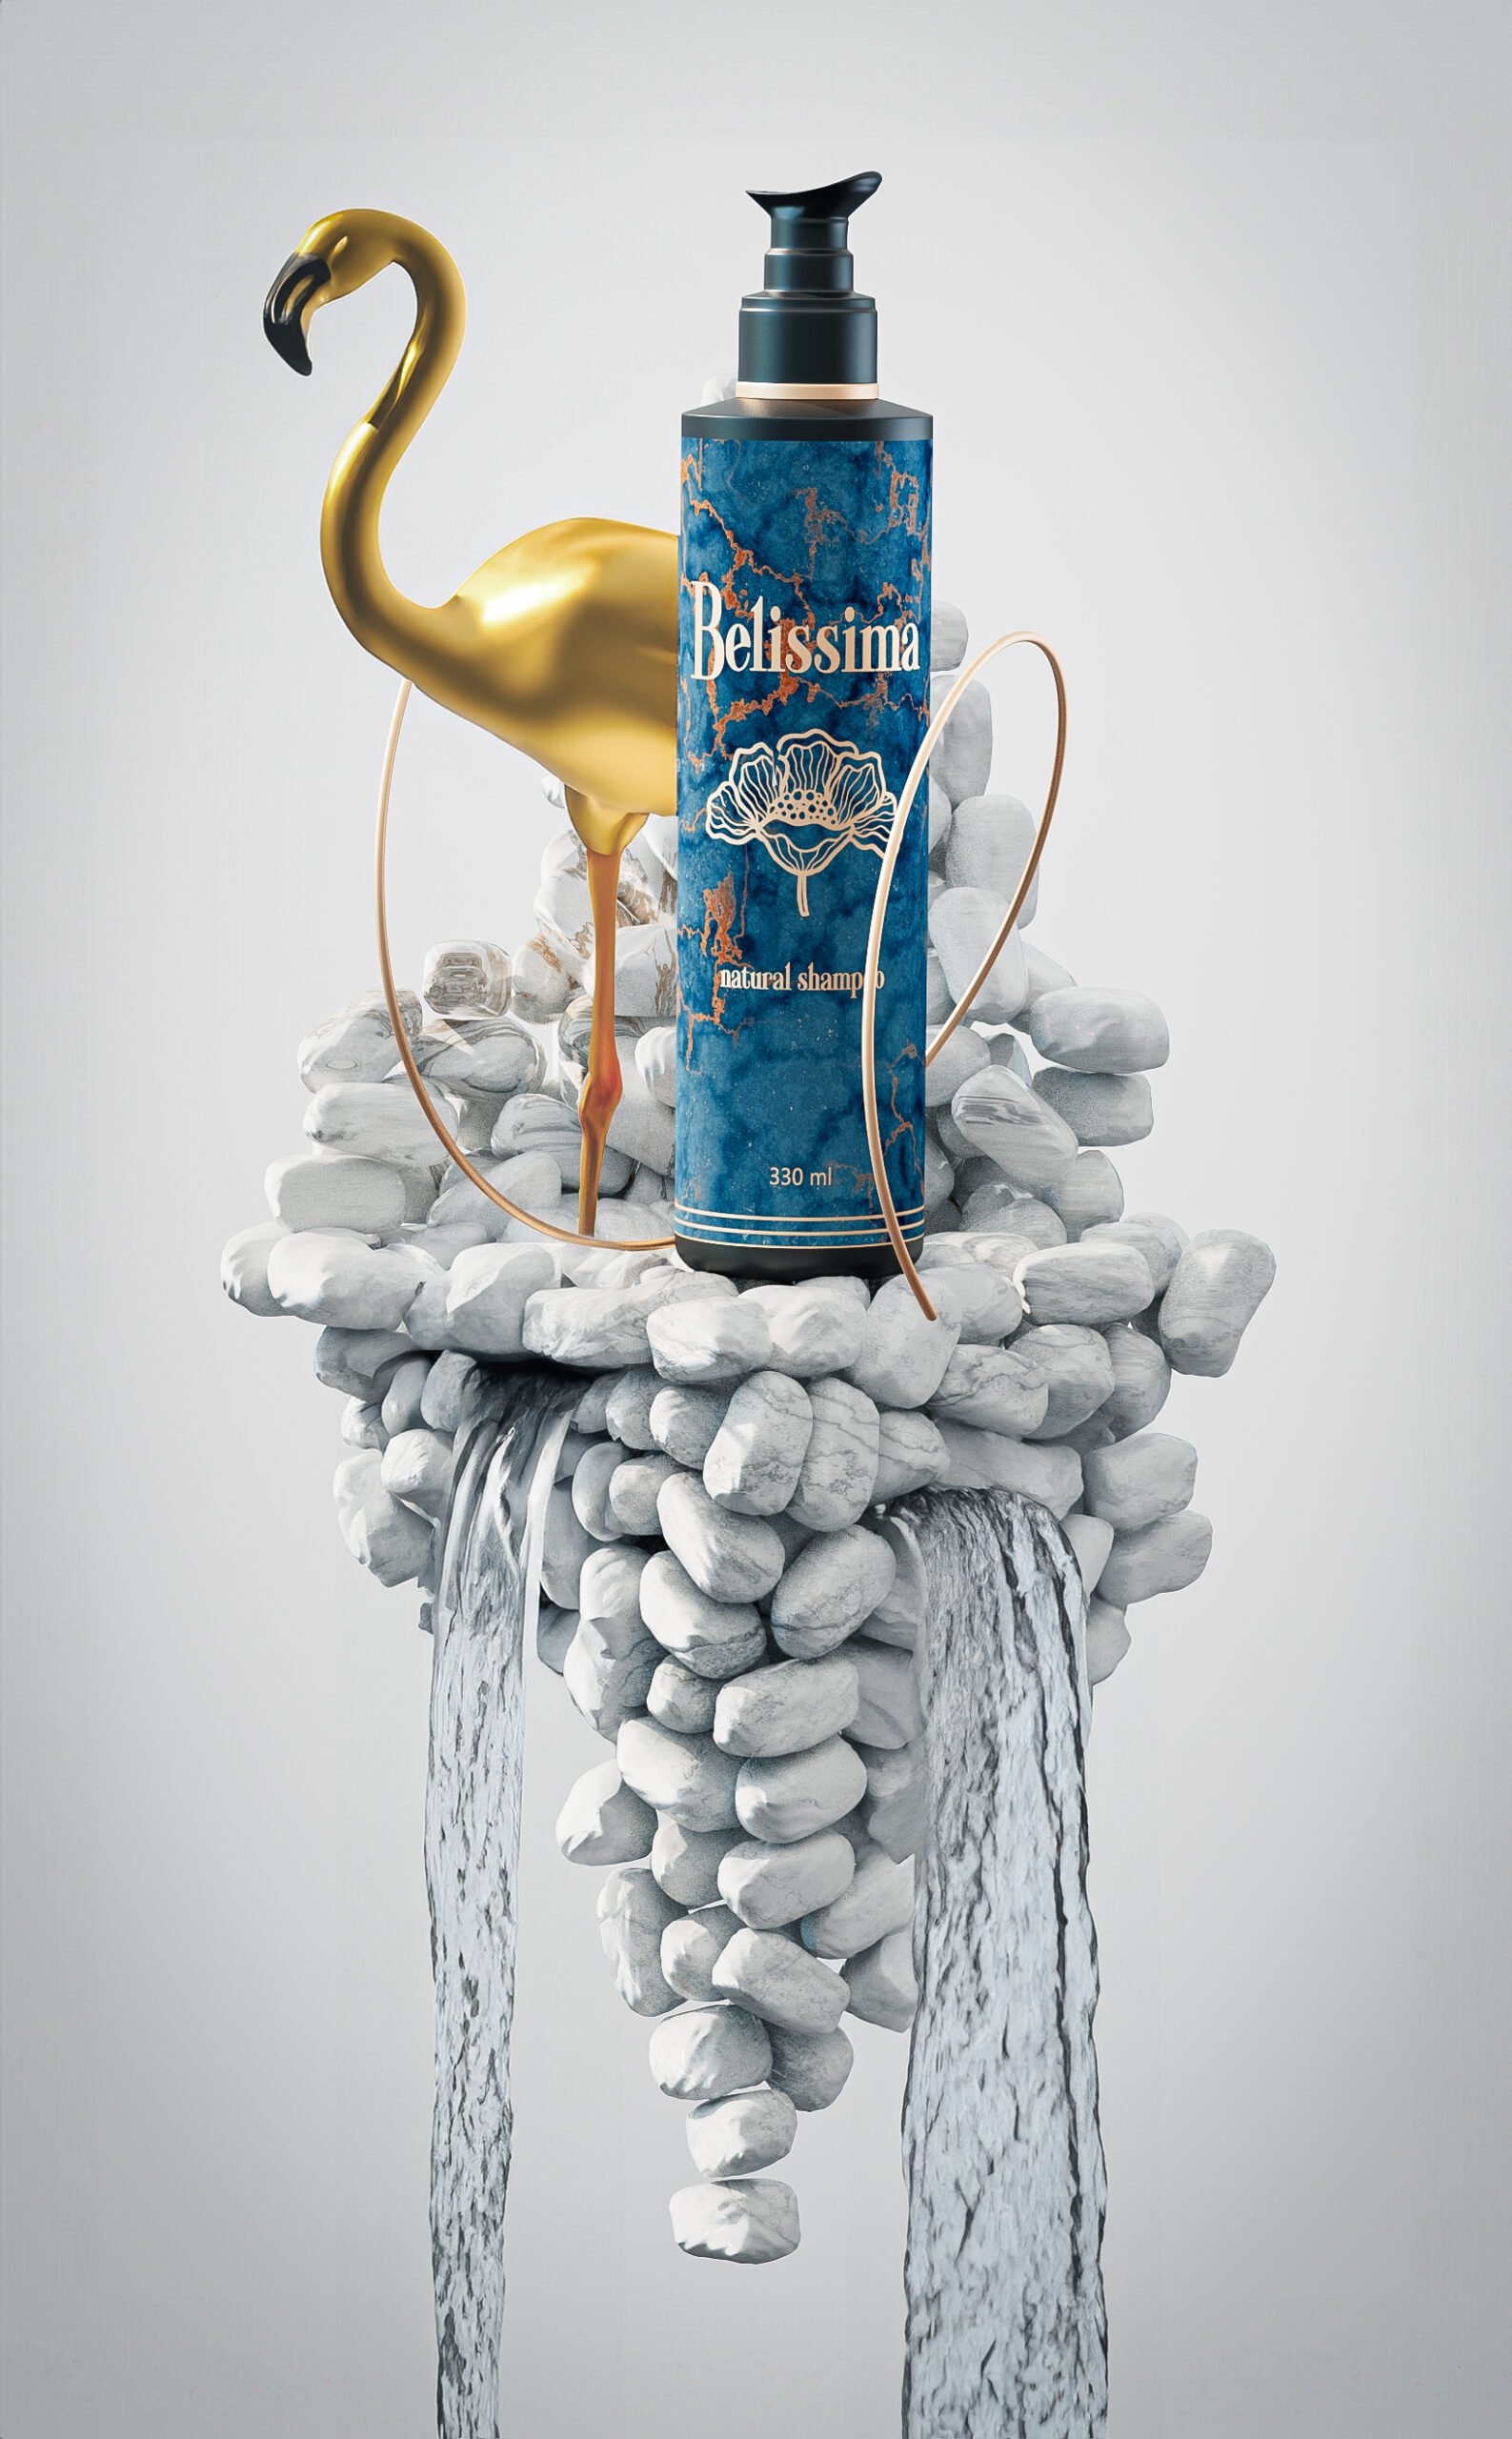 Graphic designer Claudio Beck composed a 3d render of a shampoo cosmetic package with white pebble stones in the background, featuring a golden flamingo and a pair of waterfalls.